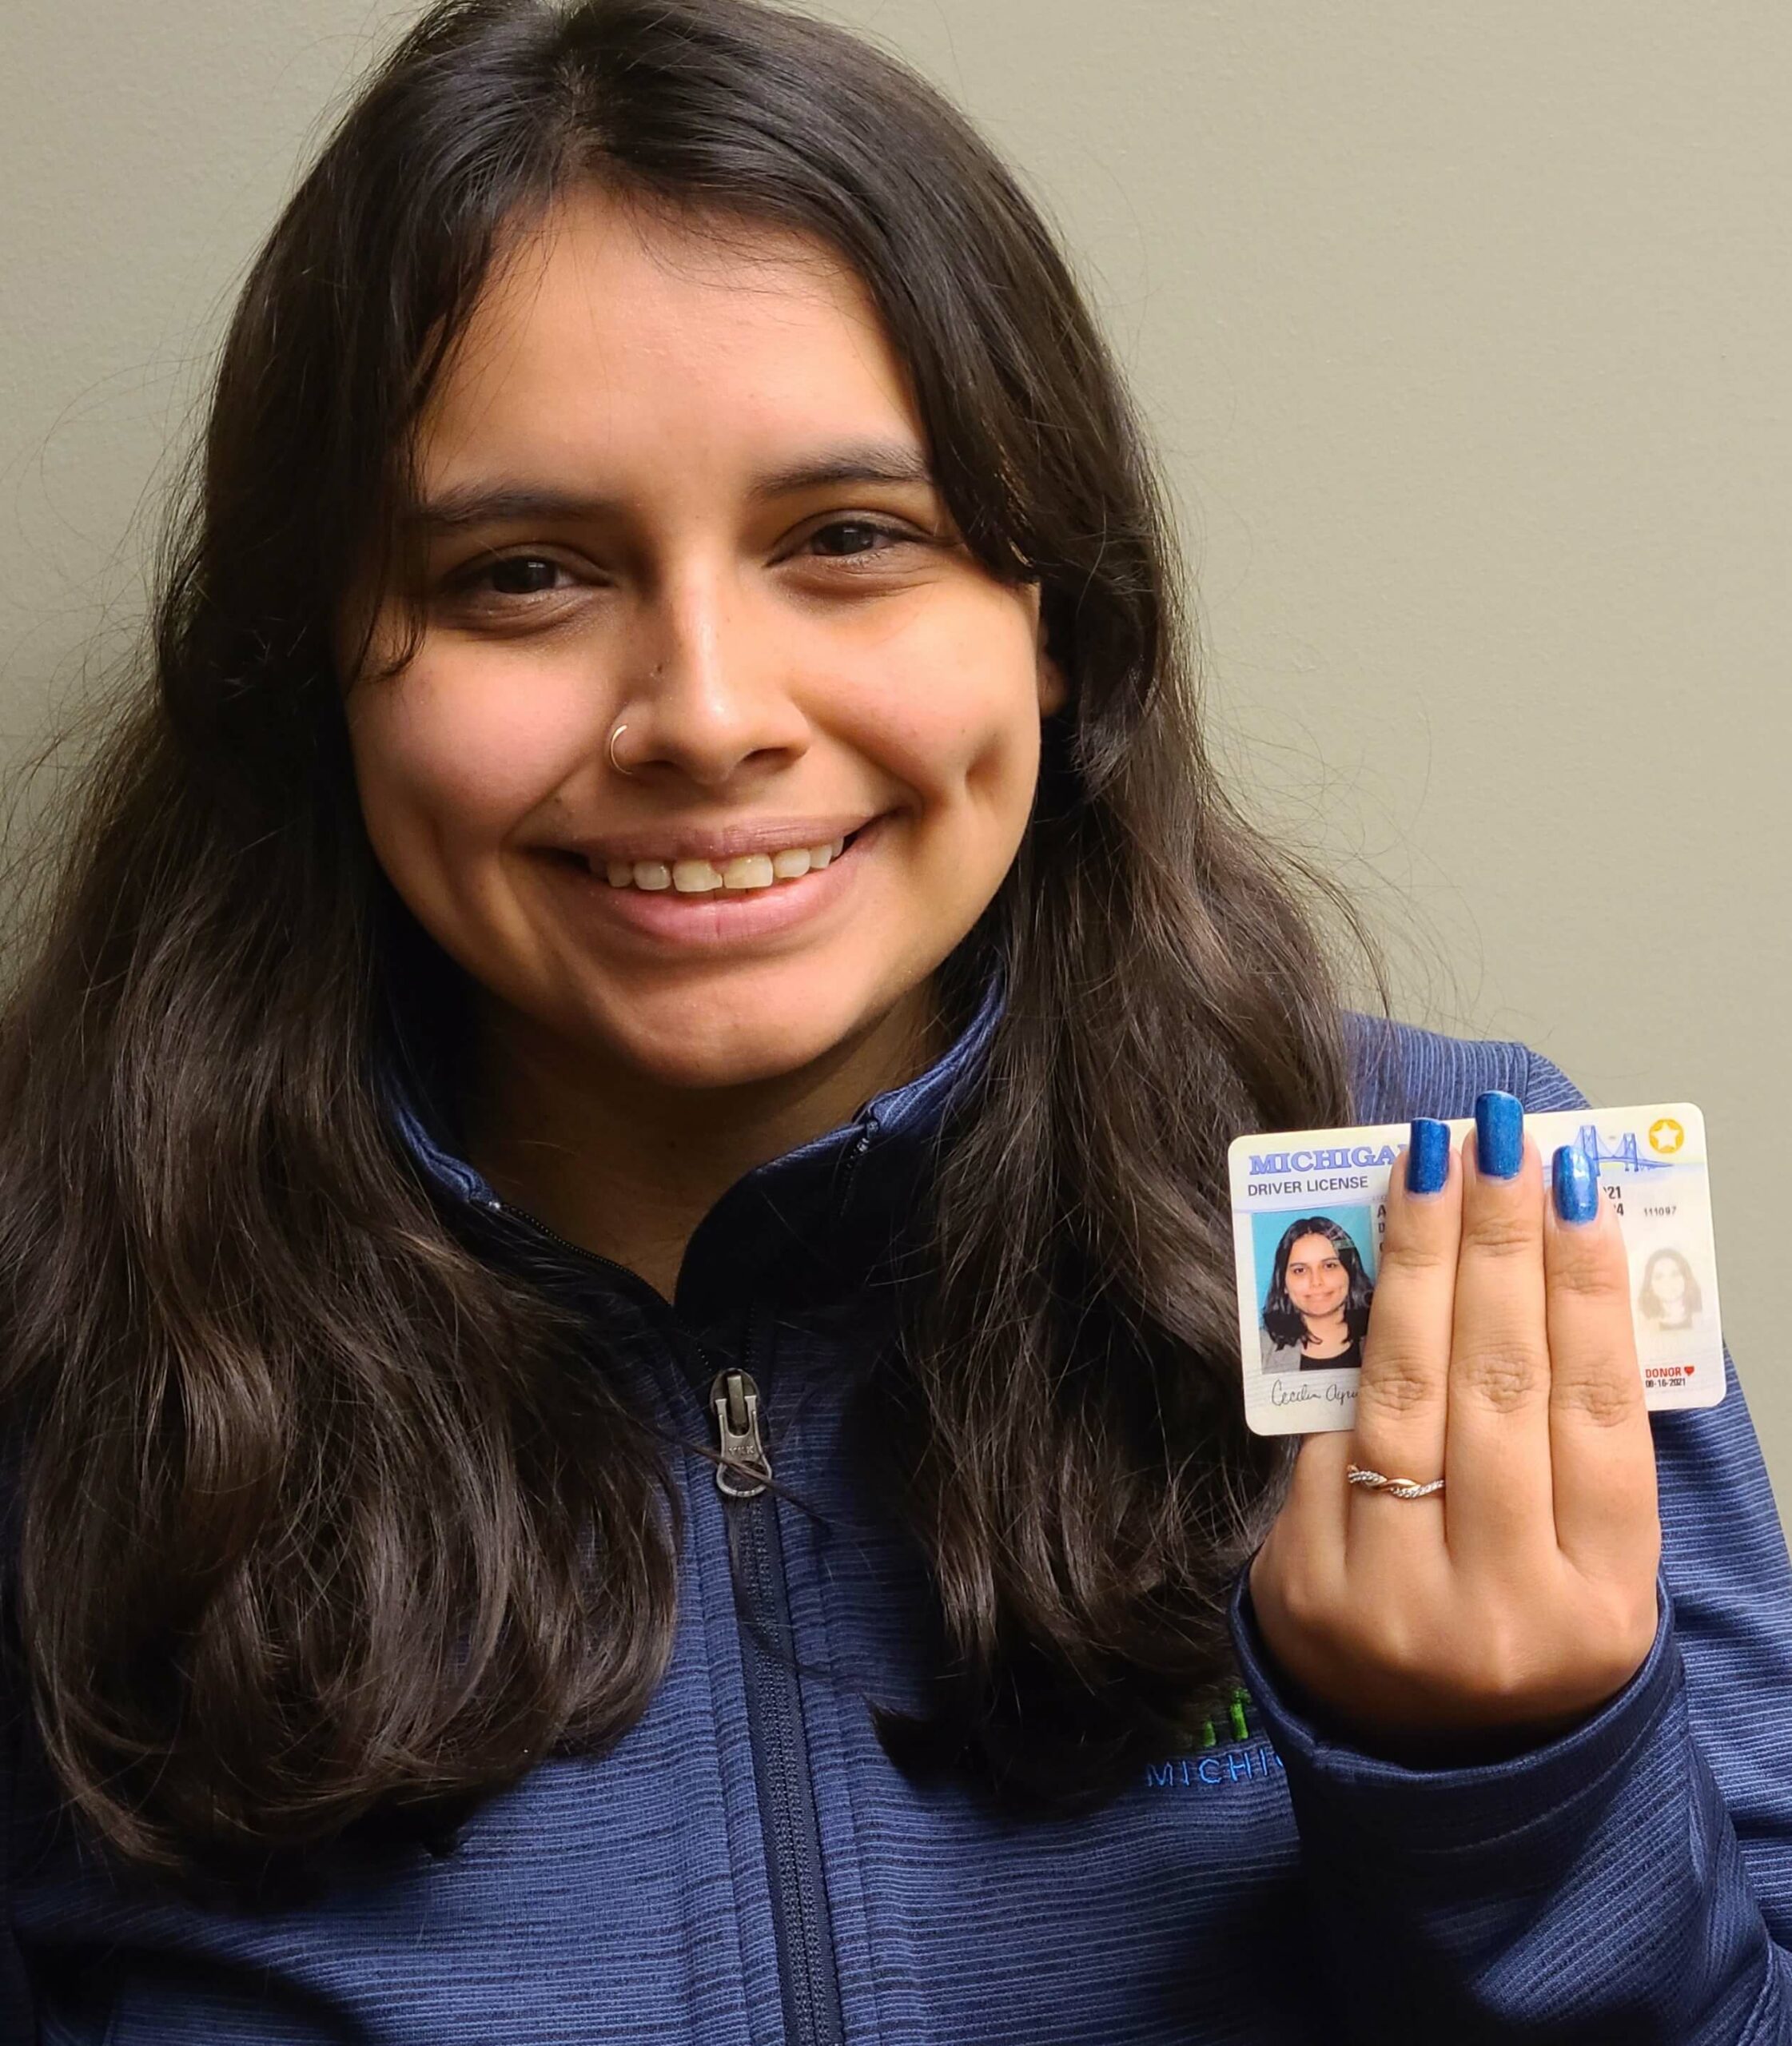 Latina woman holding up driver's license, showing the donor heart symbol